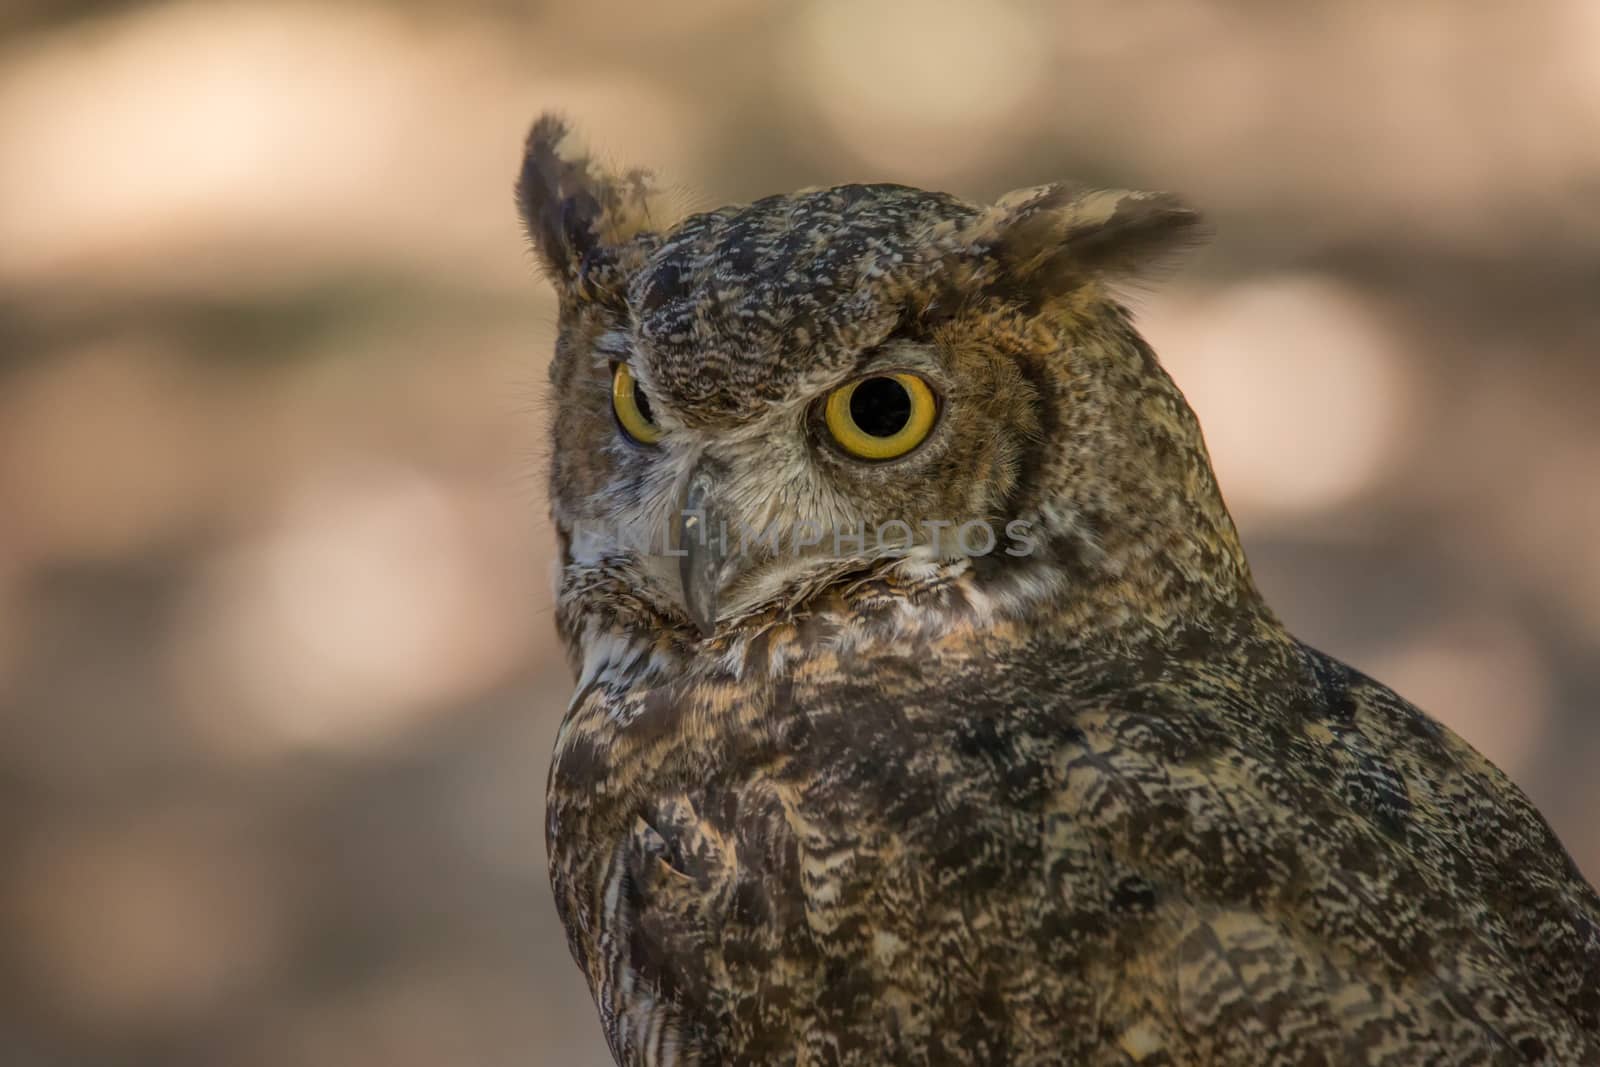 Portrait of a Wise Old Owl by backyard_photography